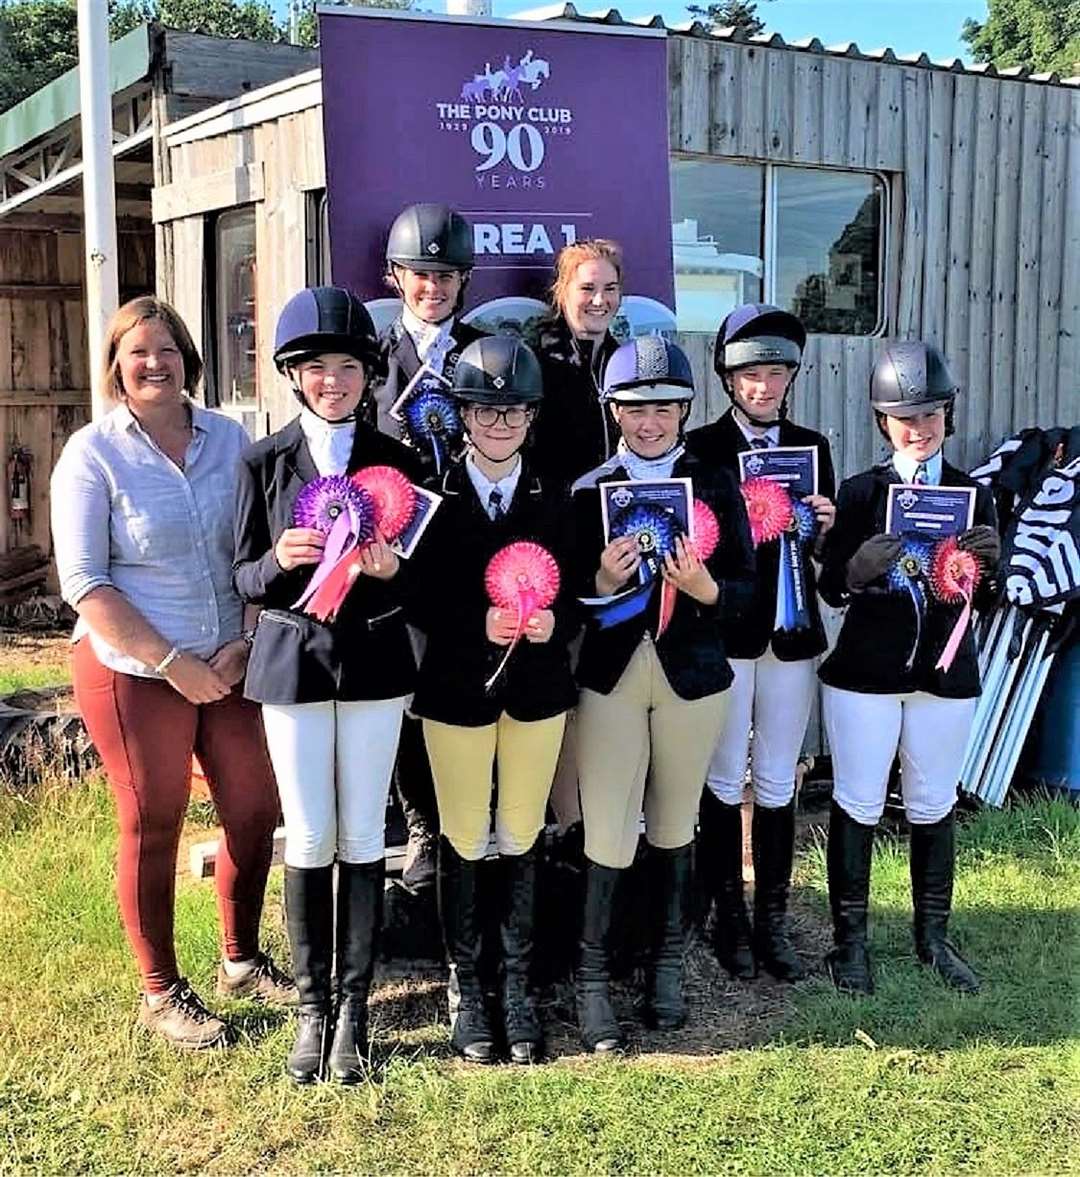 Proudly displaying their awards after the showjumping prize-giving are the Caithness team members along with branch DC Debbie Pottinger (front left). In the back row are Sophia Ramsøy and Frances Sutherland, while in the front (left to right) are Emily Campbell, Alysha Holmes, Lauren Oag, Erin Hewitson and Danielle Sinclair.